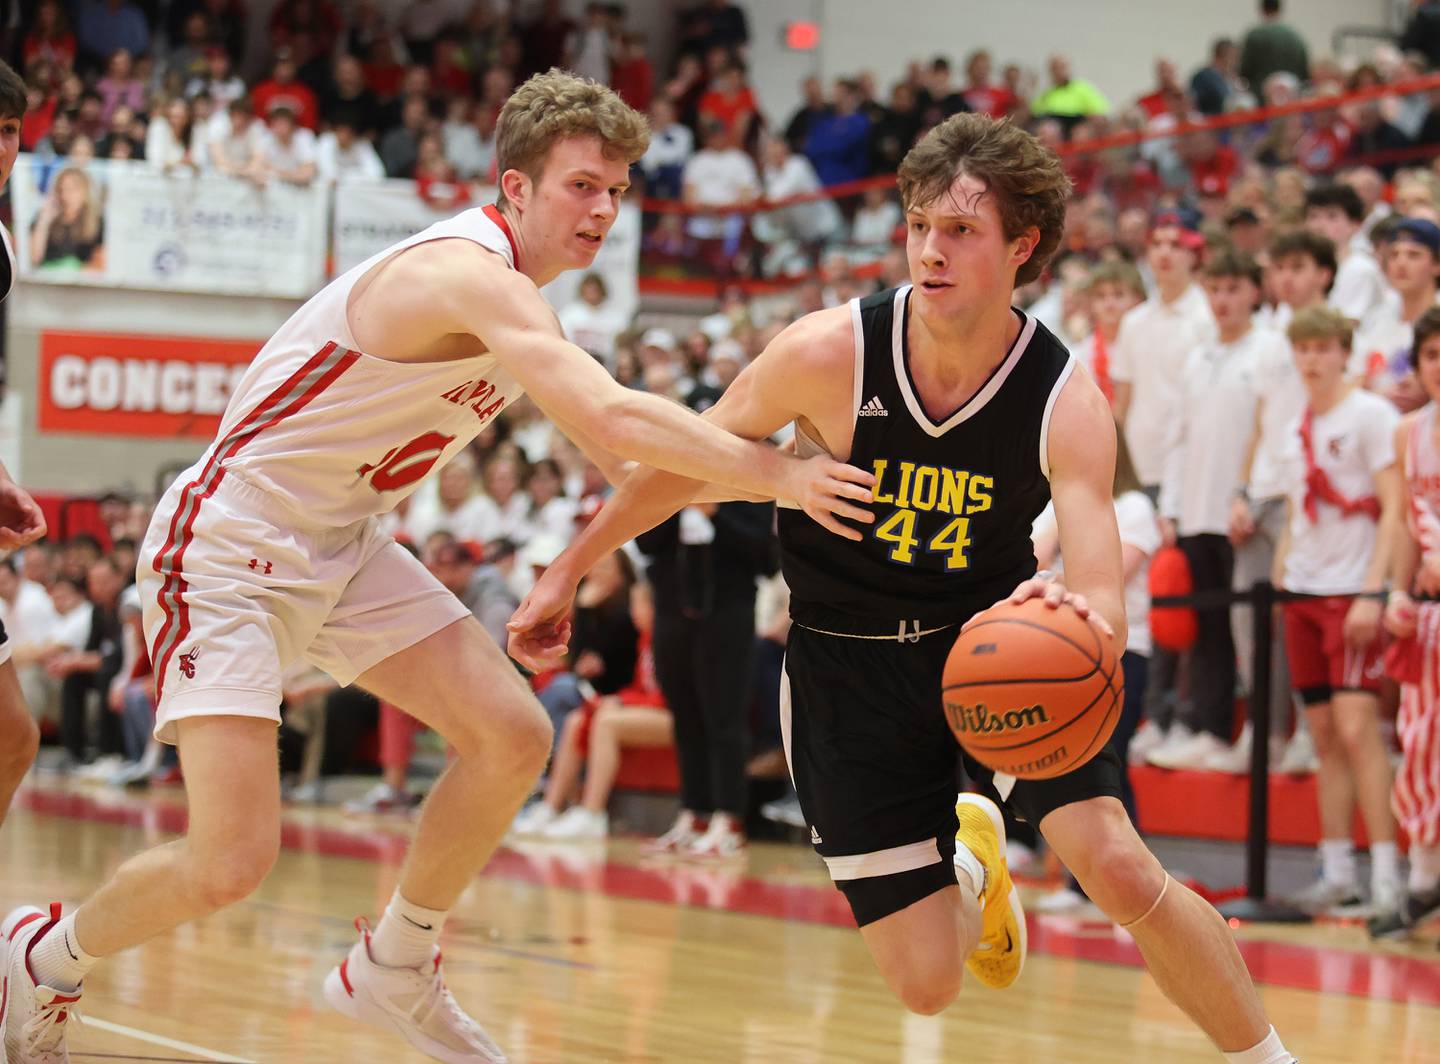 Lyons' Niklas Polonowski (44) drives the baseline during the boys 4A varsity sectional semi-final game between Hinsdale Central and Lyons Township high schools in Hinsdale on Wednesday, March 1, 2023.